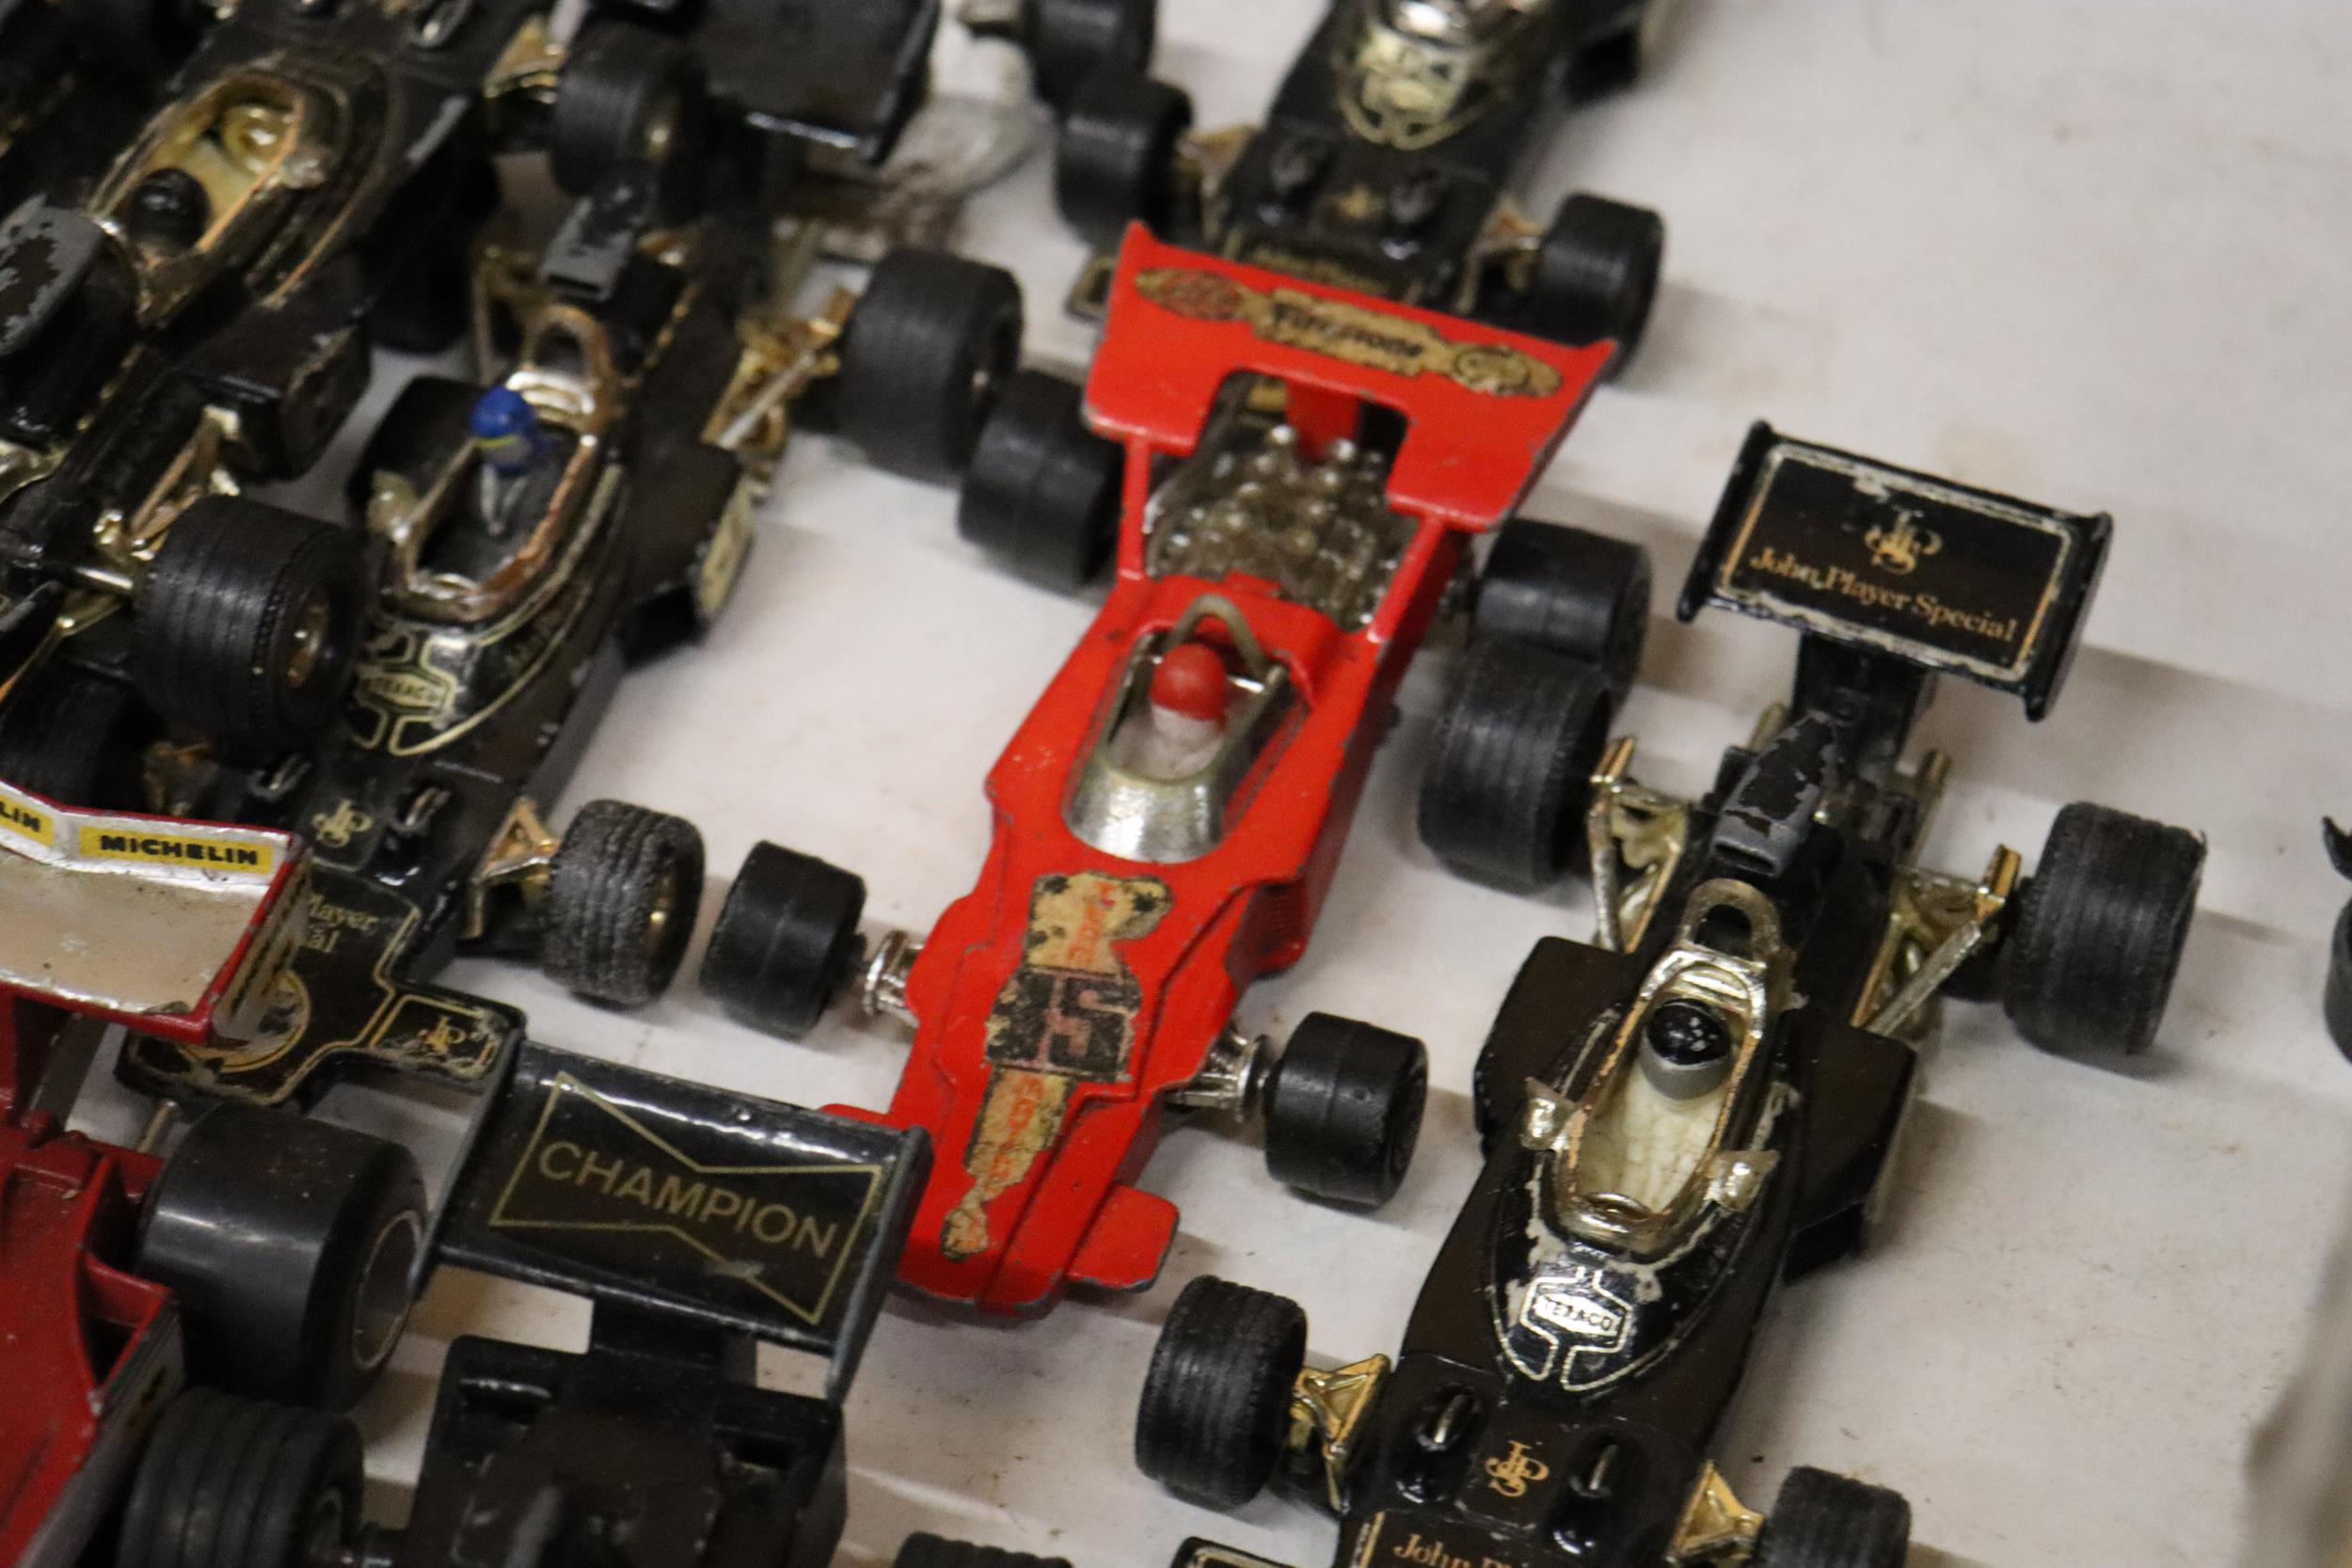 A LARGE QUANTITY OF VINTAGE DIE-CAST CORGI AND MATCHBOX F1 RACING CARS - Image 7 of 9